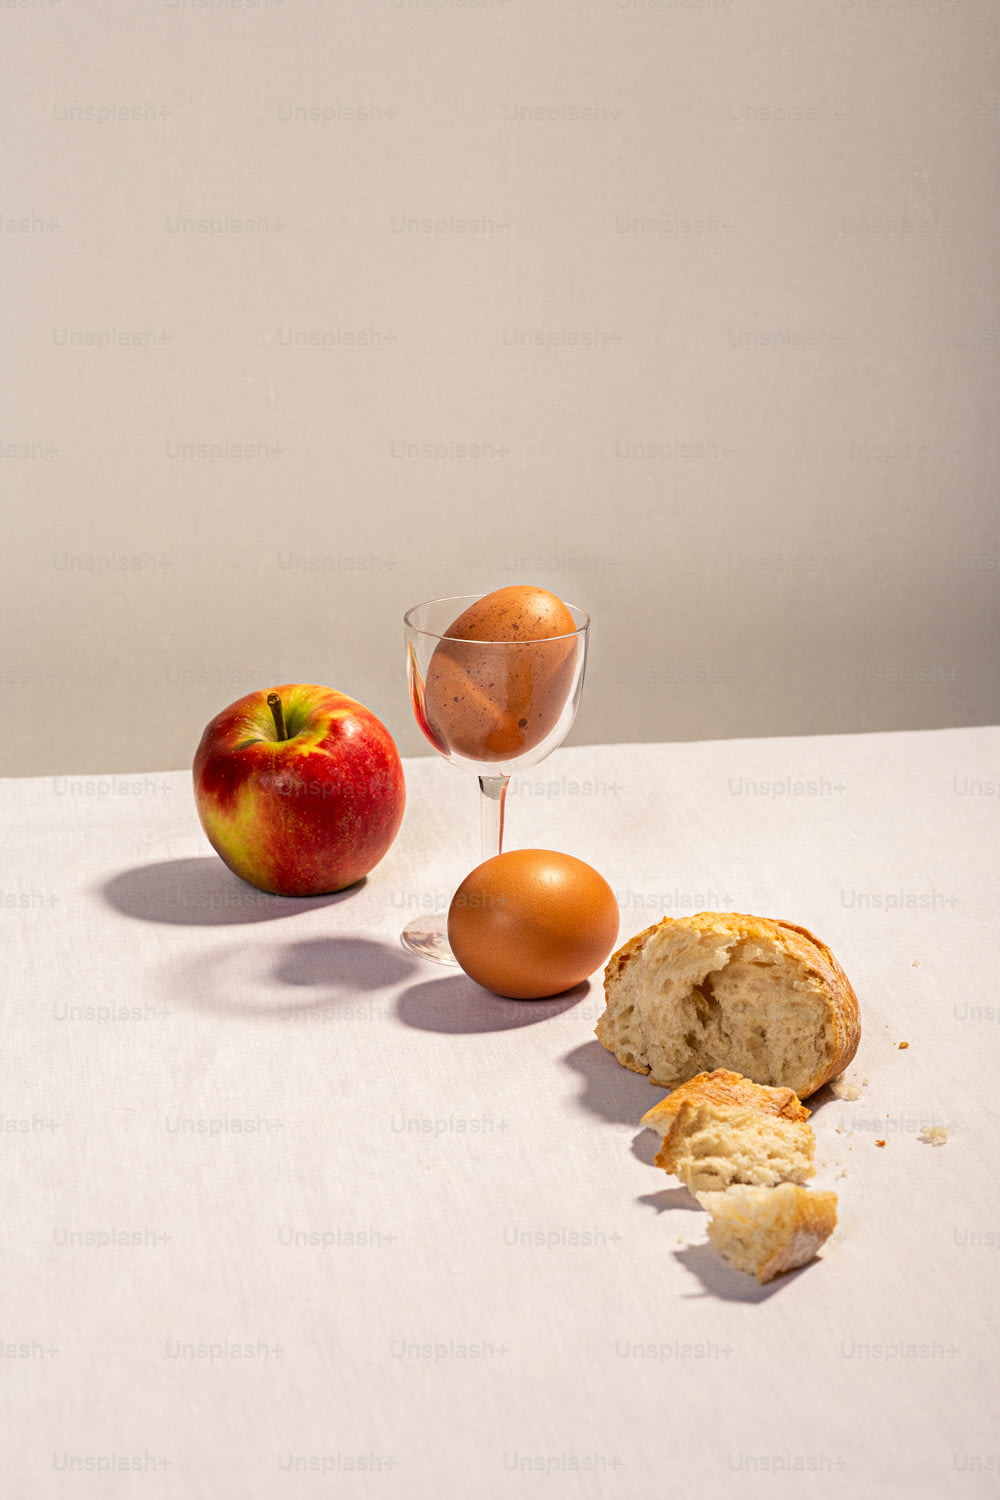 a table topped with an apple and a muffin next to an egg